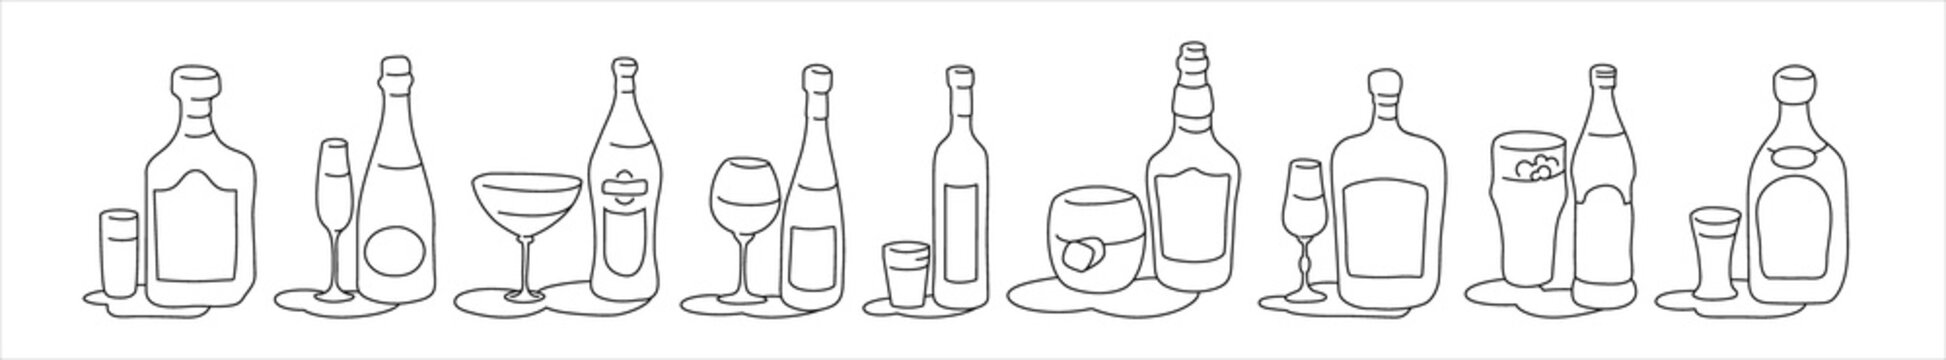 Rum champagne vermouth wine vodka whiskey liquor beer tequila bottle and glass outline icon on white background. Black white cartoon sketch graphic design. Doodle style. Hand drawn image. Party drinks